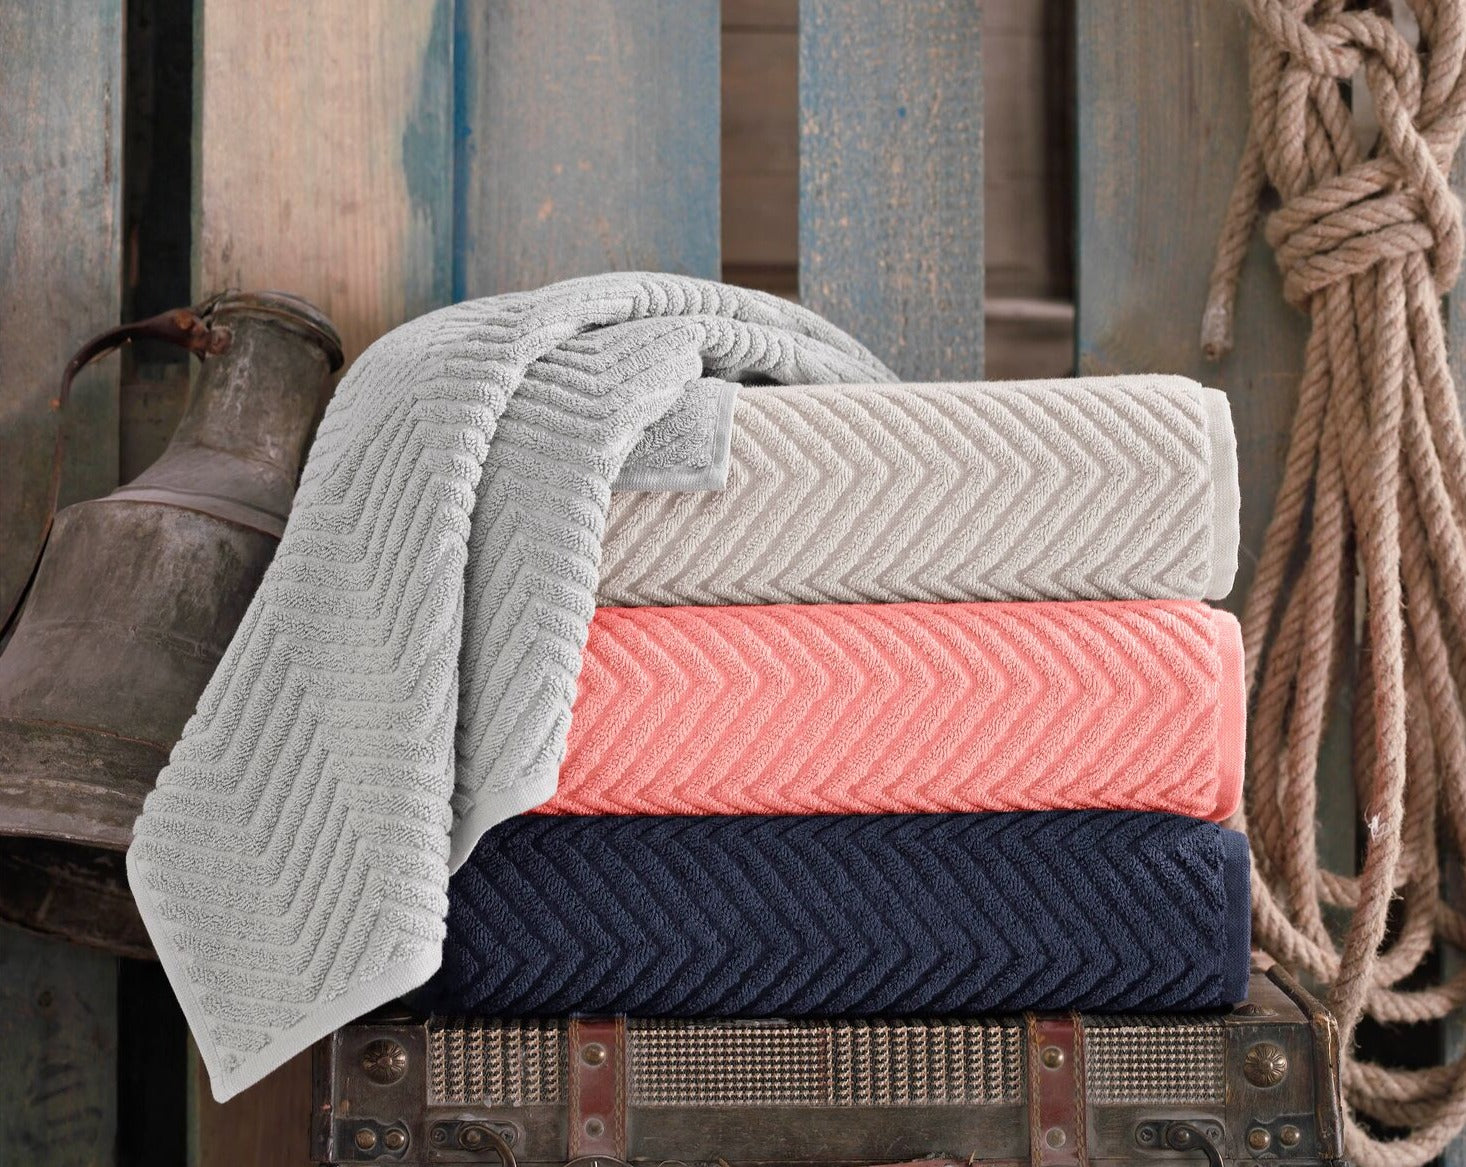 Venice Collection 2 Bath Towels Set - BagLunchproduct,corp